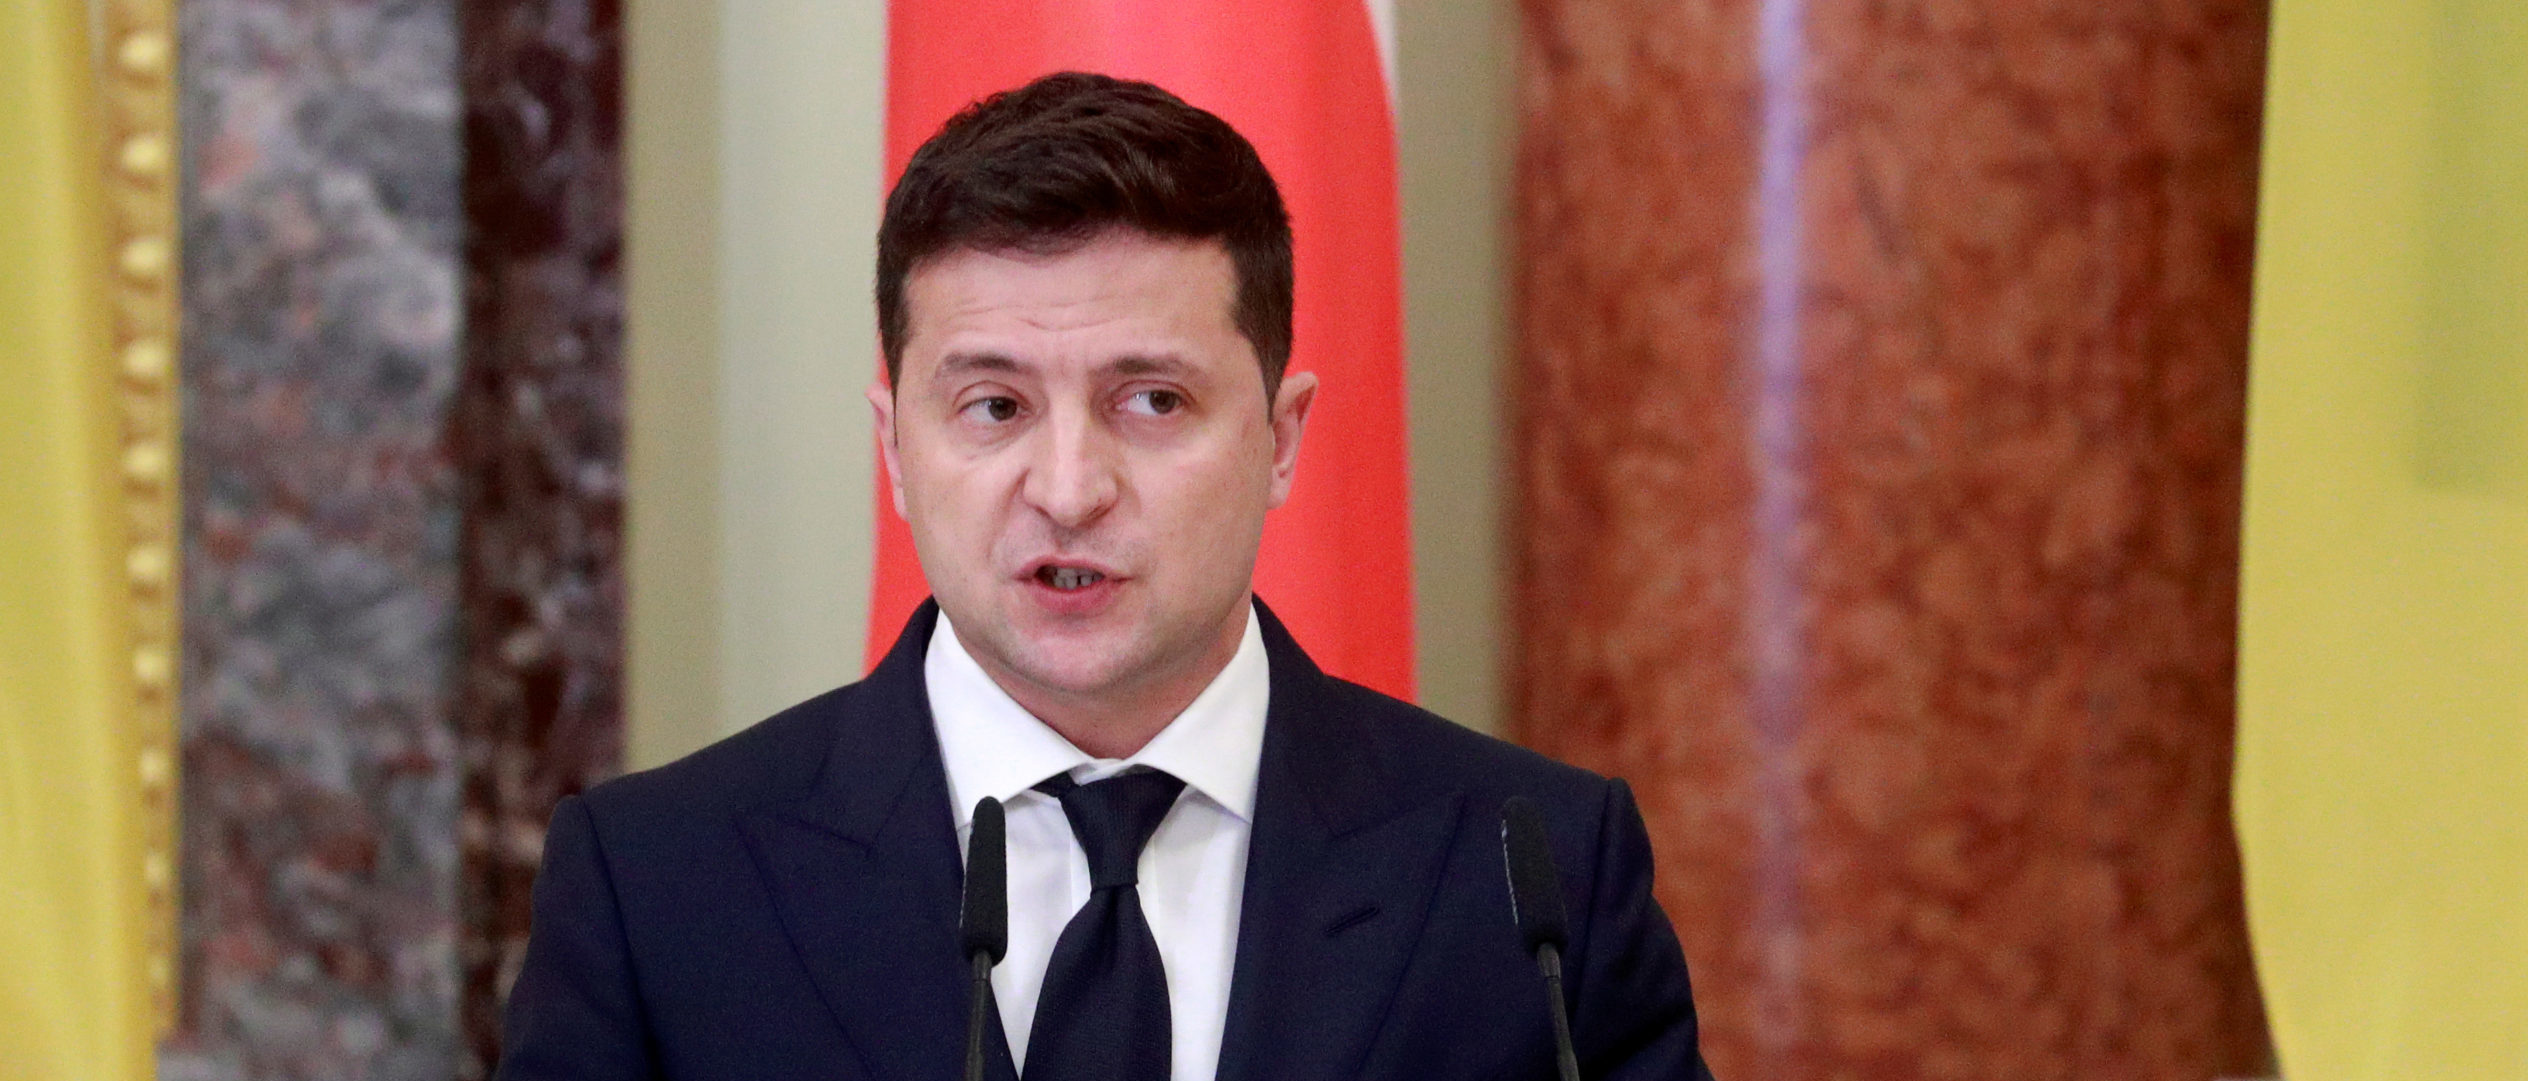 Ukrainian President Volodymyr Zelenskiy speaks during a joint news briefing with Polish President Andrzej Duda (not pictured) as they meet in Kyiv, Ukraine October 12, 2020. REUTERS/Valentyn Ogirenko/Pool/File Photo